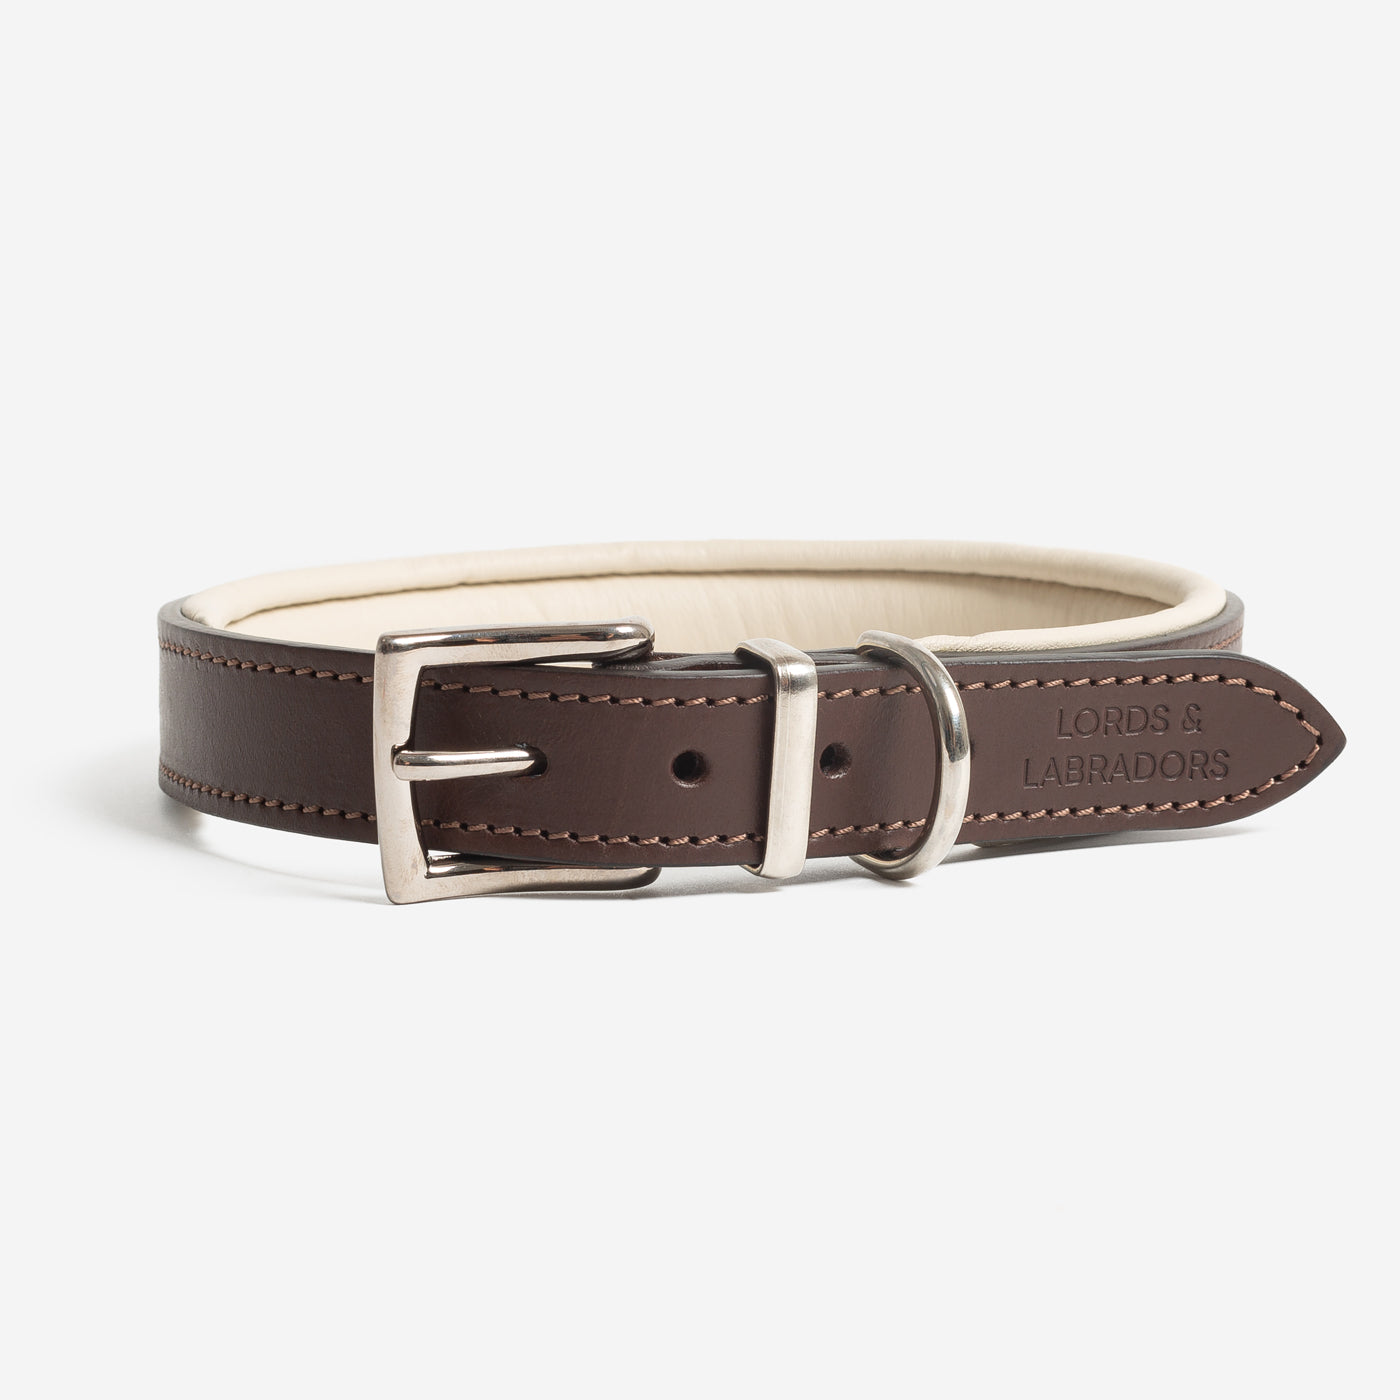 Discover dog walking luxury with our handcrafted Italian padded leather dog collar in Brown & Cream! The perfect collar for dogs available now at Lords & Labradors 